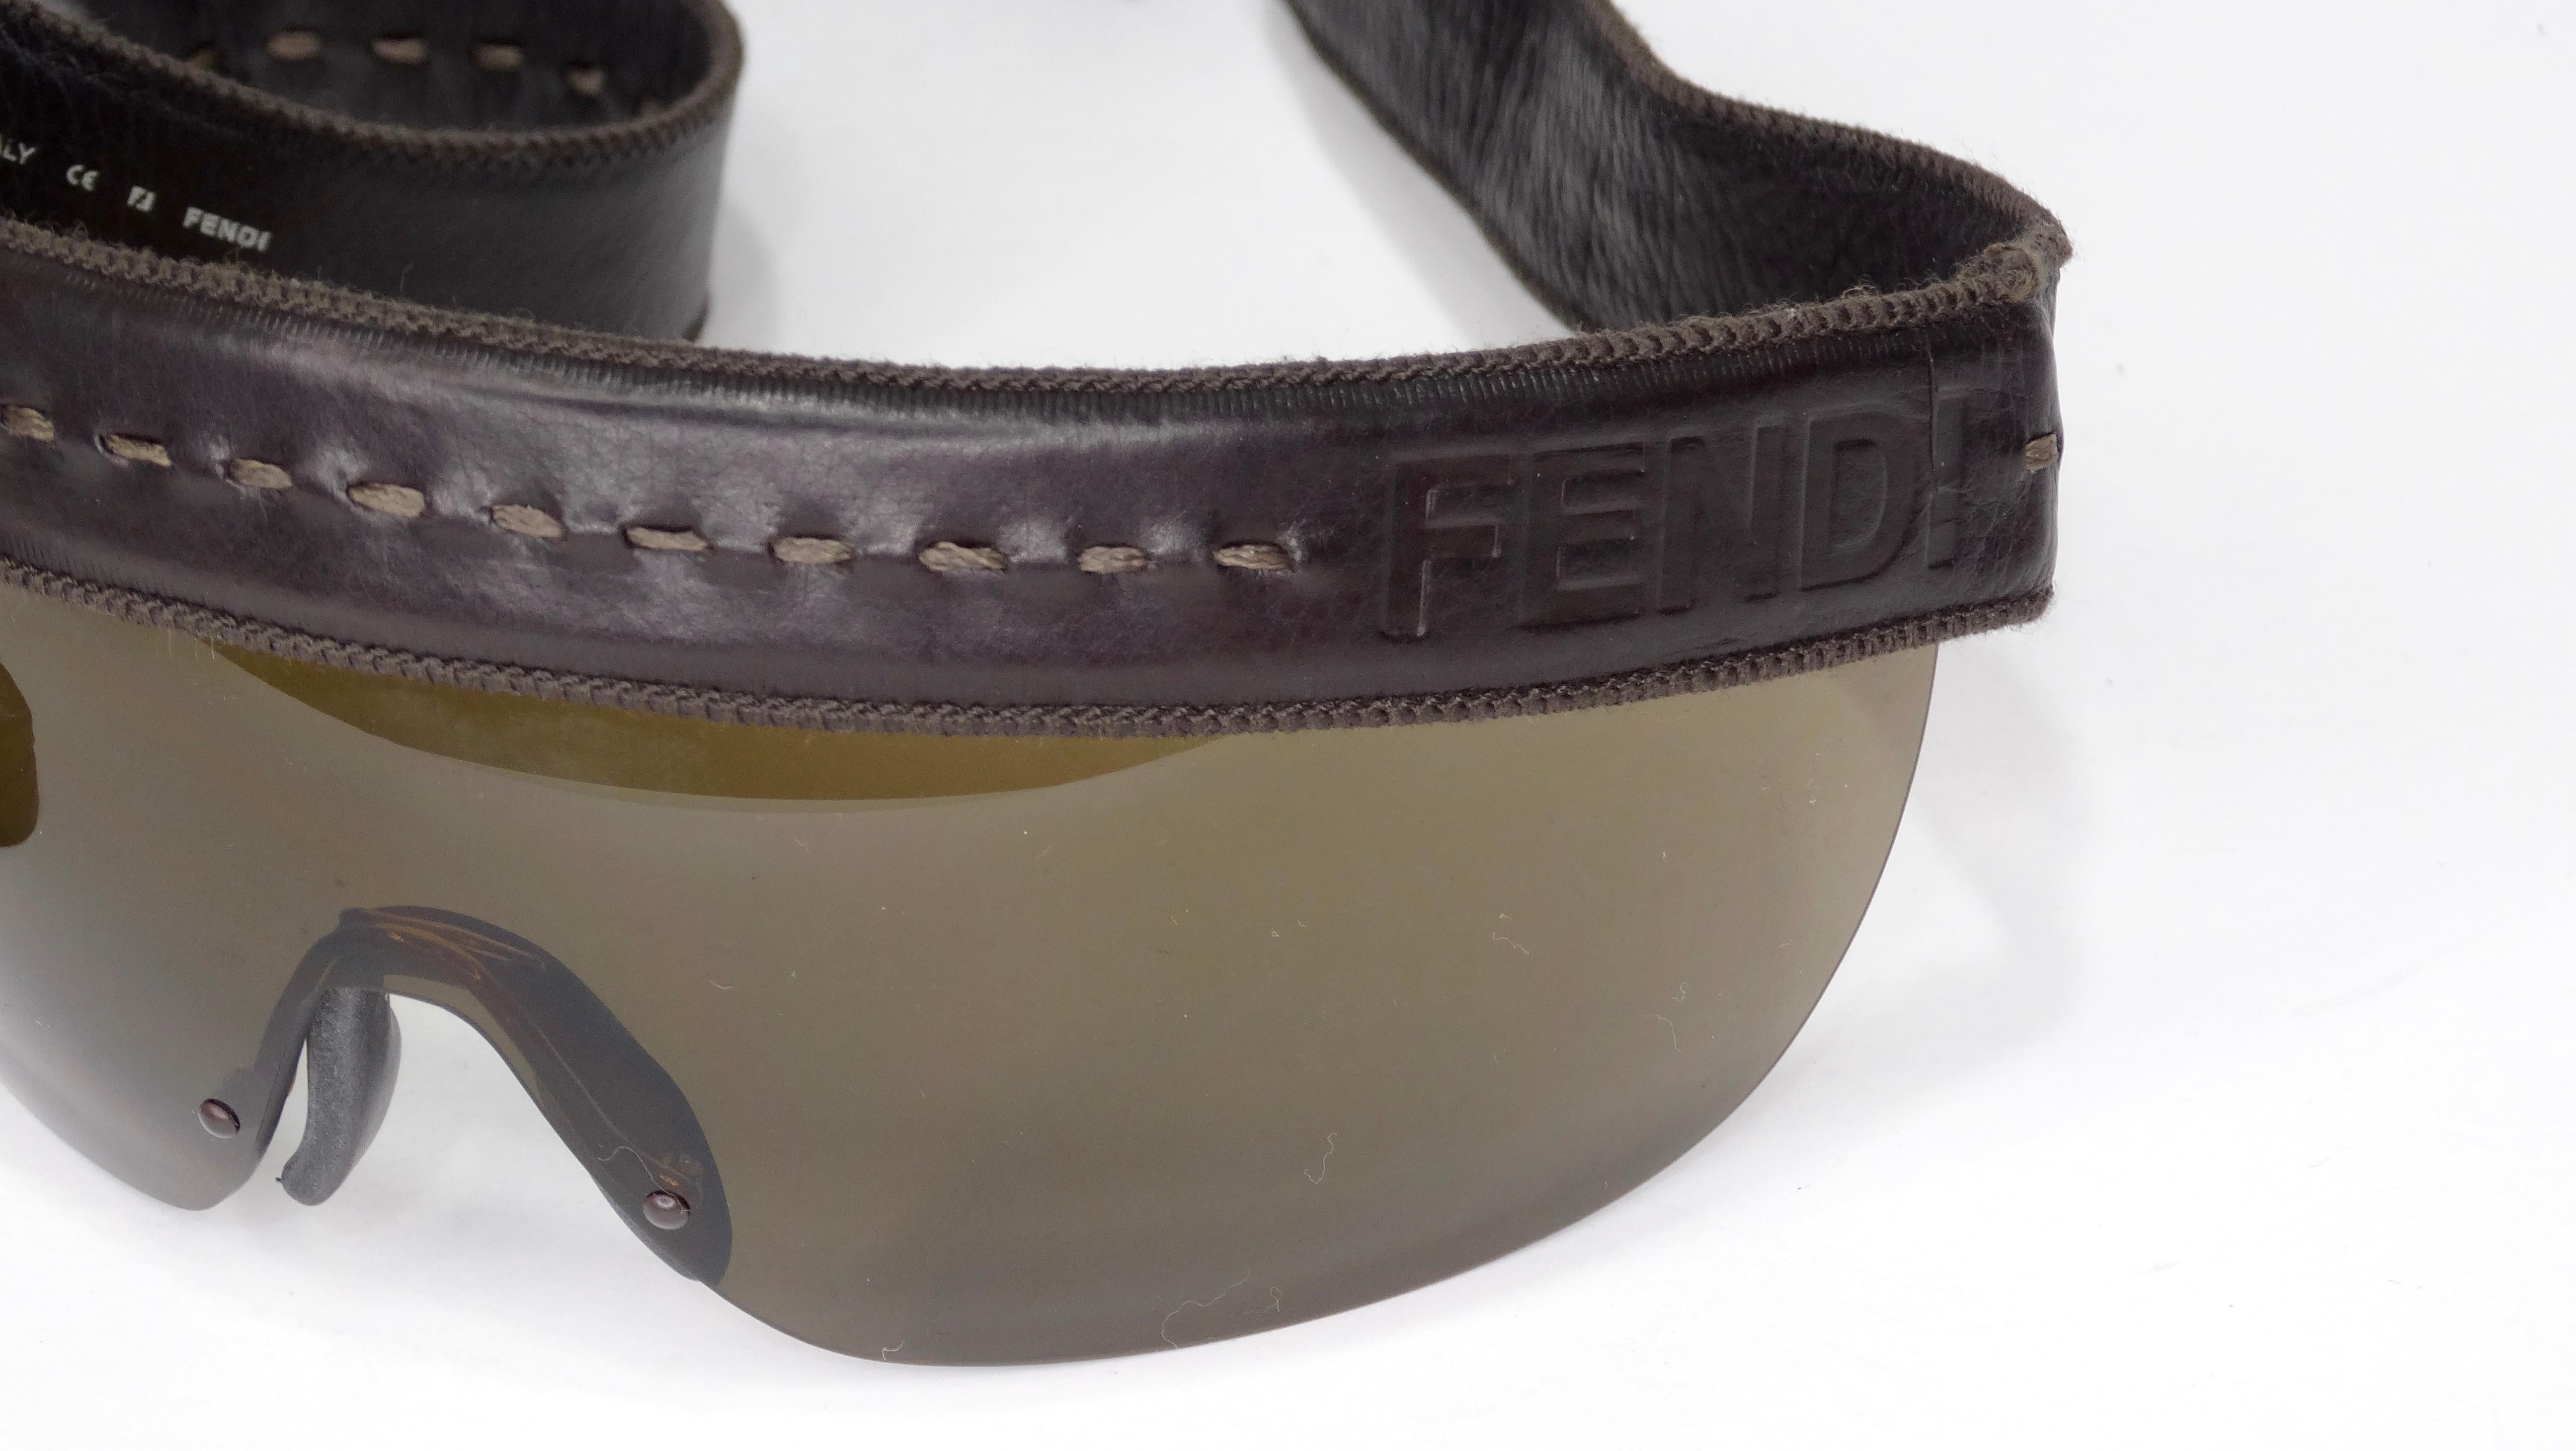 Elevate your look with these Fendi sunnies! Circa 1990s, these sunglasses feature a shield frame, dark brown lenses and a brown leather trim with fringe. Adjustable snap button closure head strap. Timeless and killer, these sunglasses are sure to be